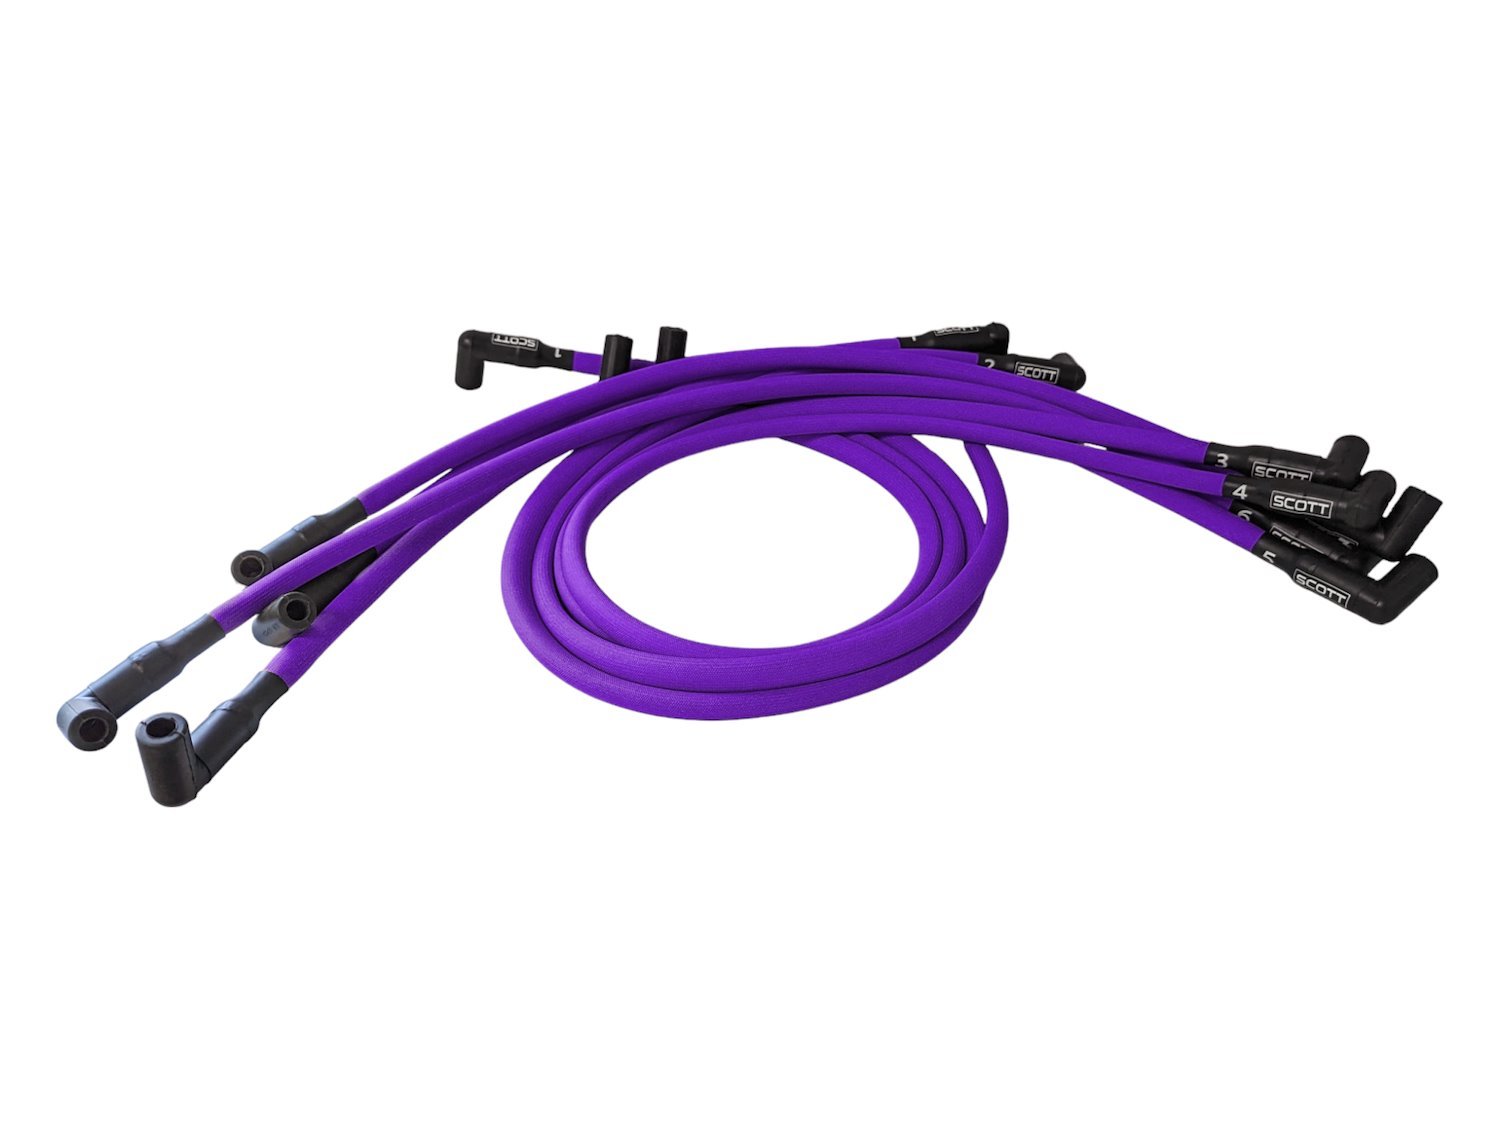 SPW-PS-430-7 High-Performance Fiberglass-Oversleeved Spark Plug Wire Set for Big Block Ford, Under Header [Purple]